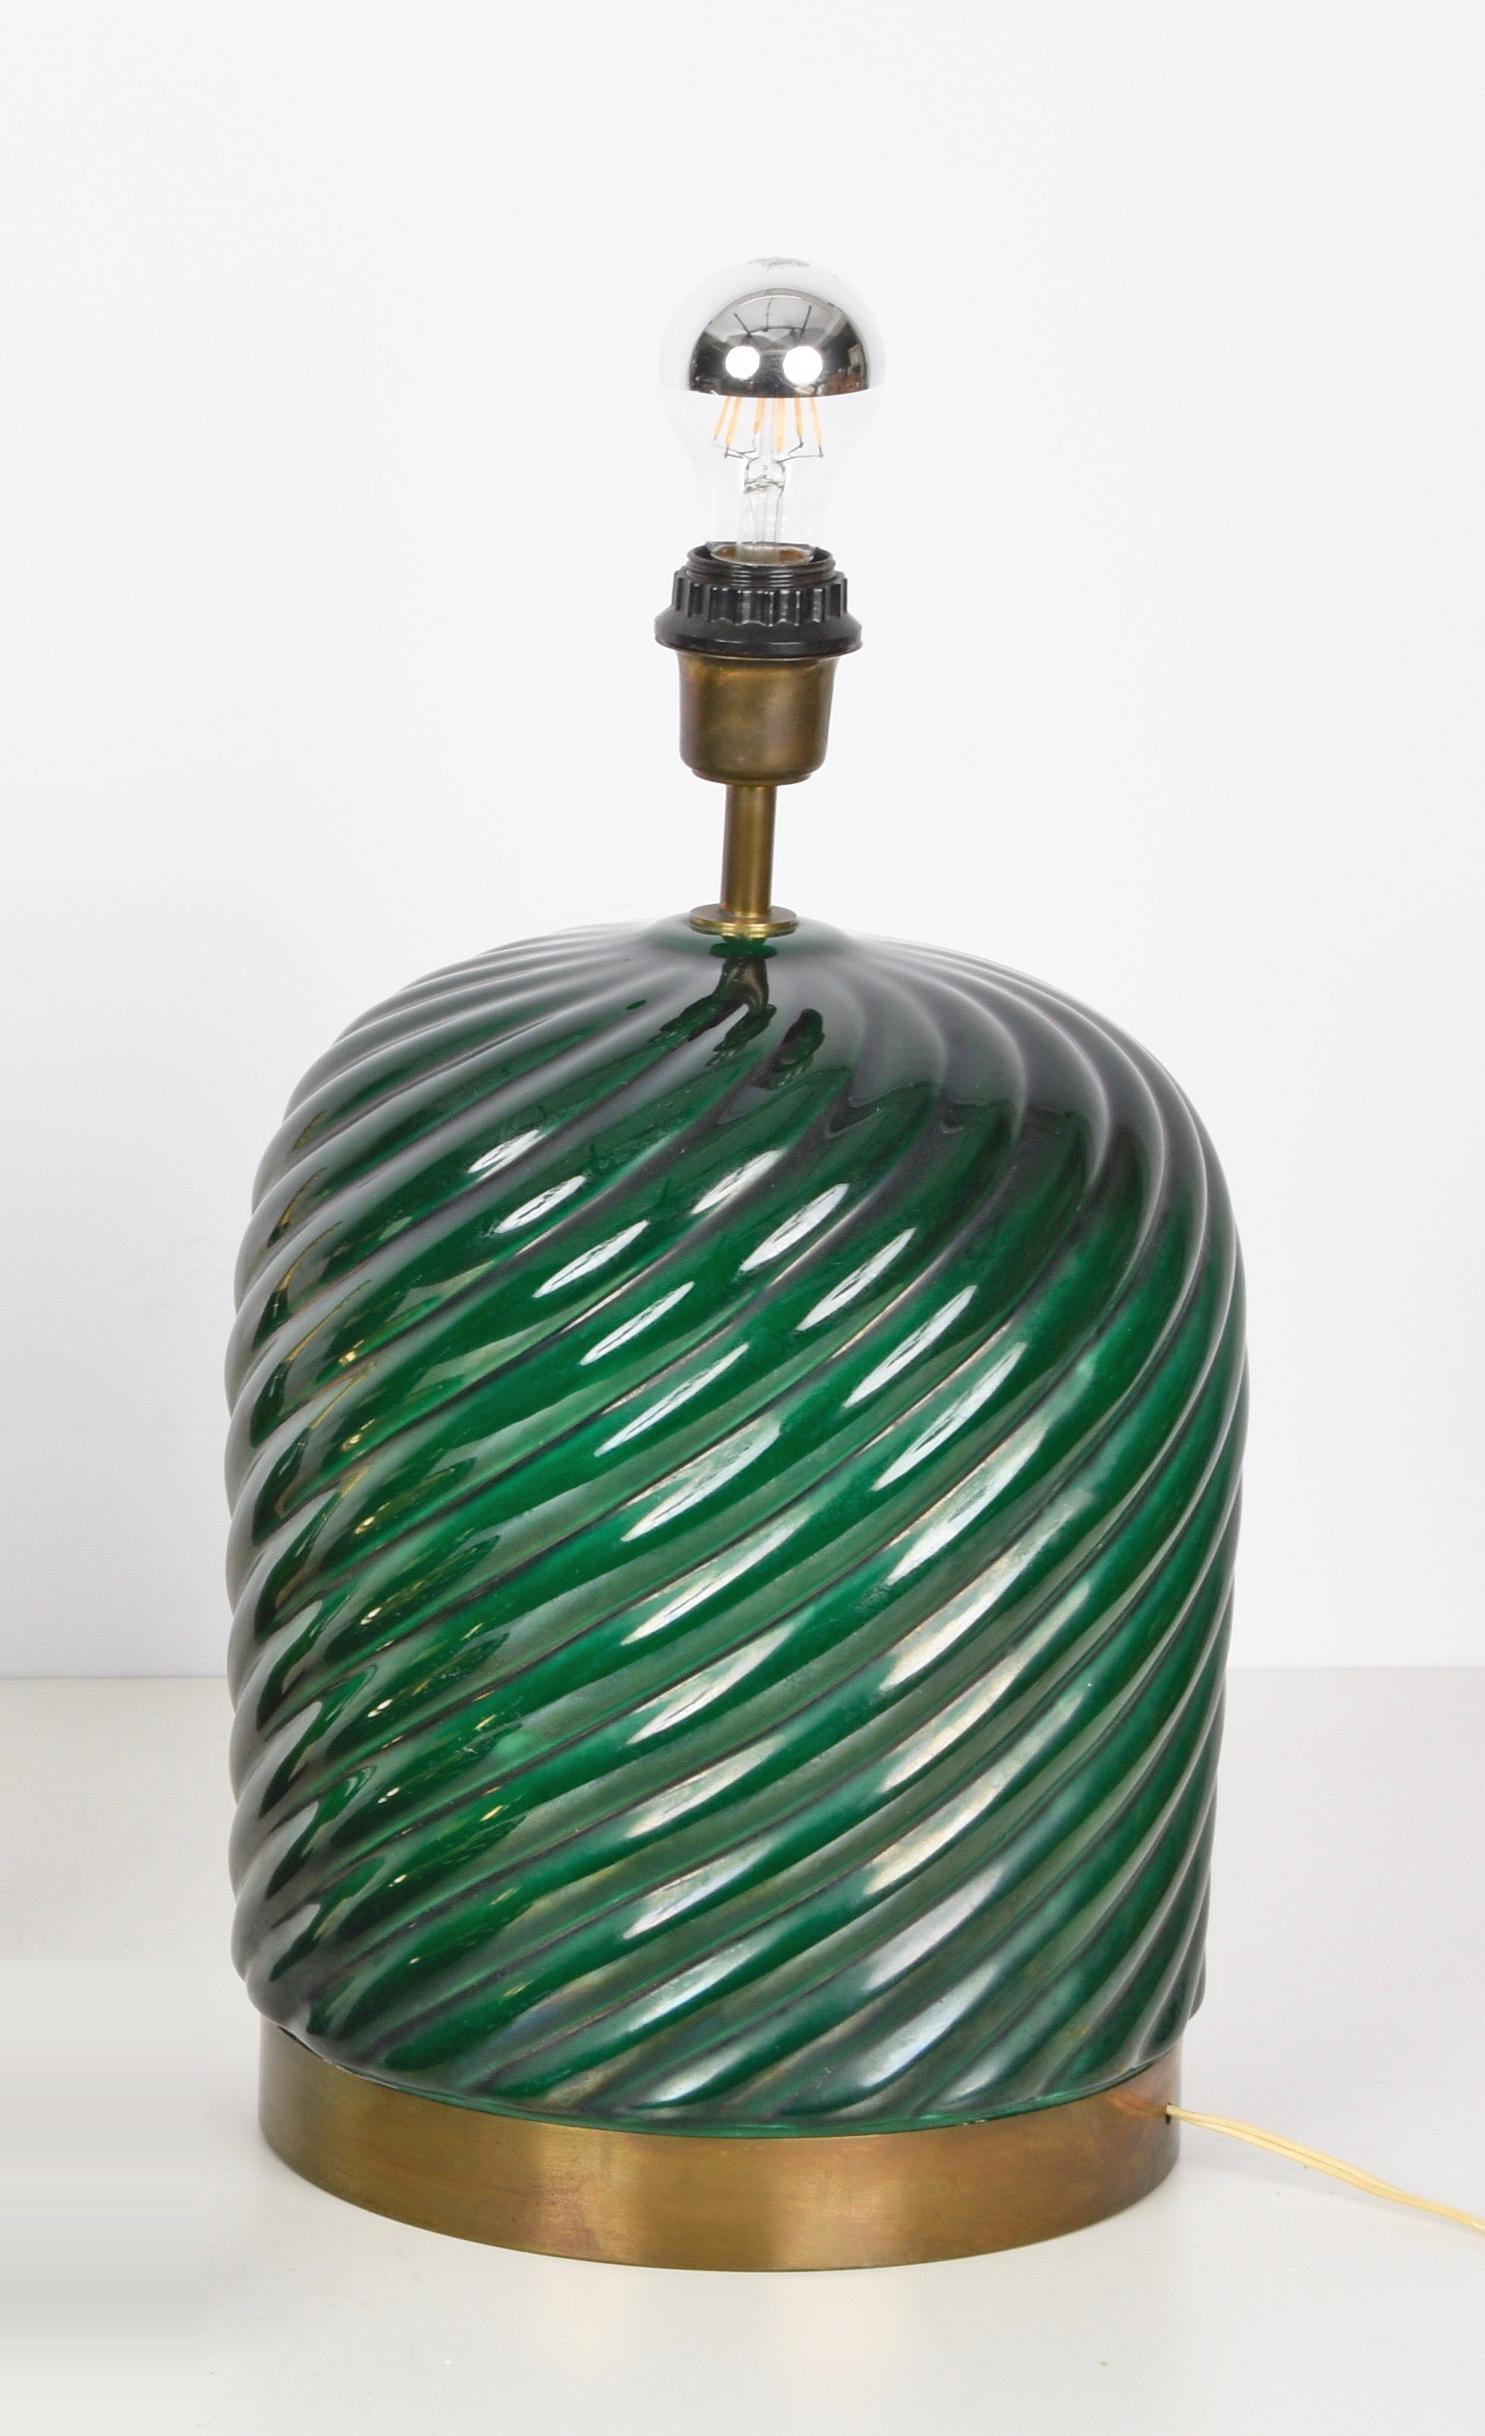 Amazing midcentury modern green ceramic and brass table lamp without shade. This fantastic piece was designed by Tommaso Barbi and produced by B. Ceramiche during the late 1960s in Italy.

The brand of the manufacturer is inside the lamp, while on